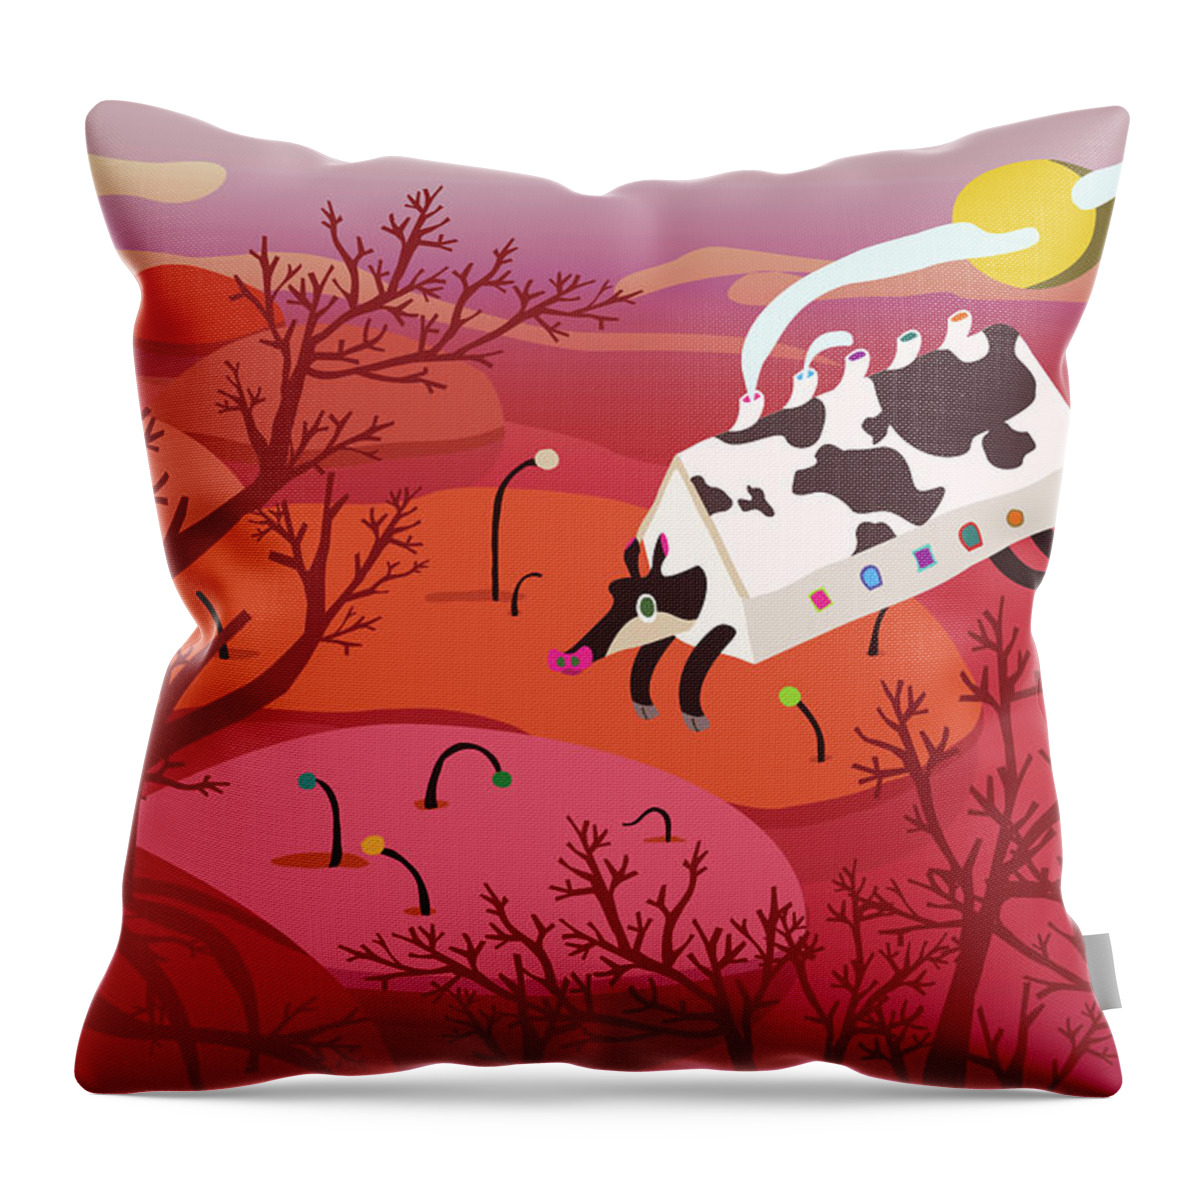 Taiwan Throw Pillow featuring the digital art Cow Live In House by Gracekaten